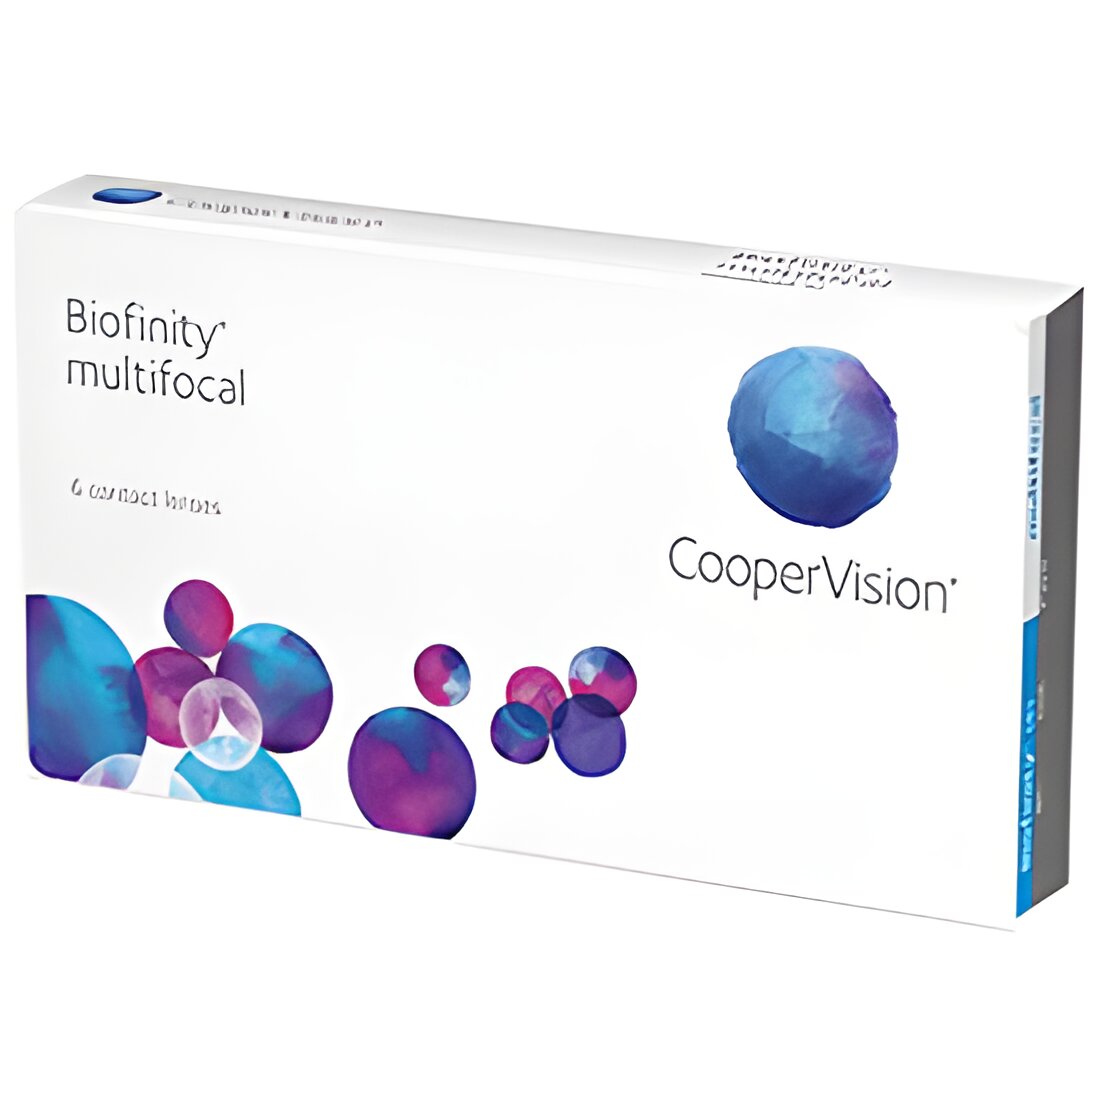 Free CooperVision Contact Lens Trial